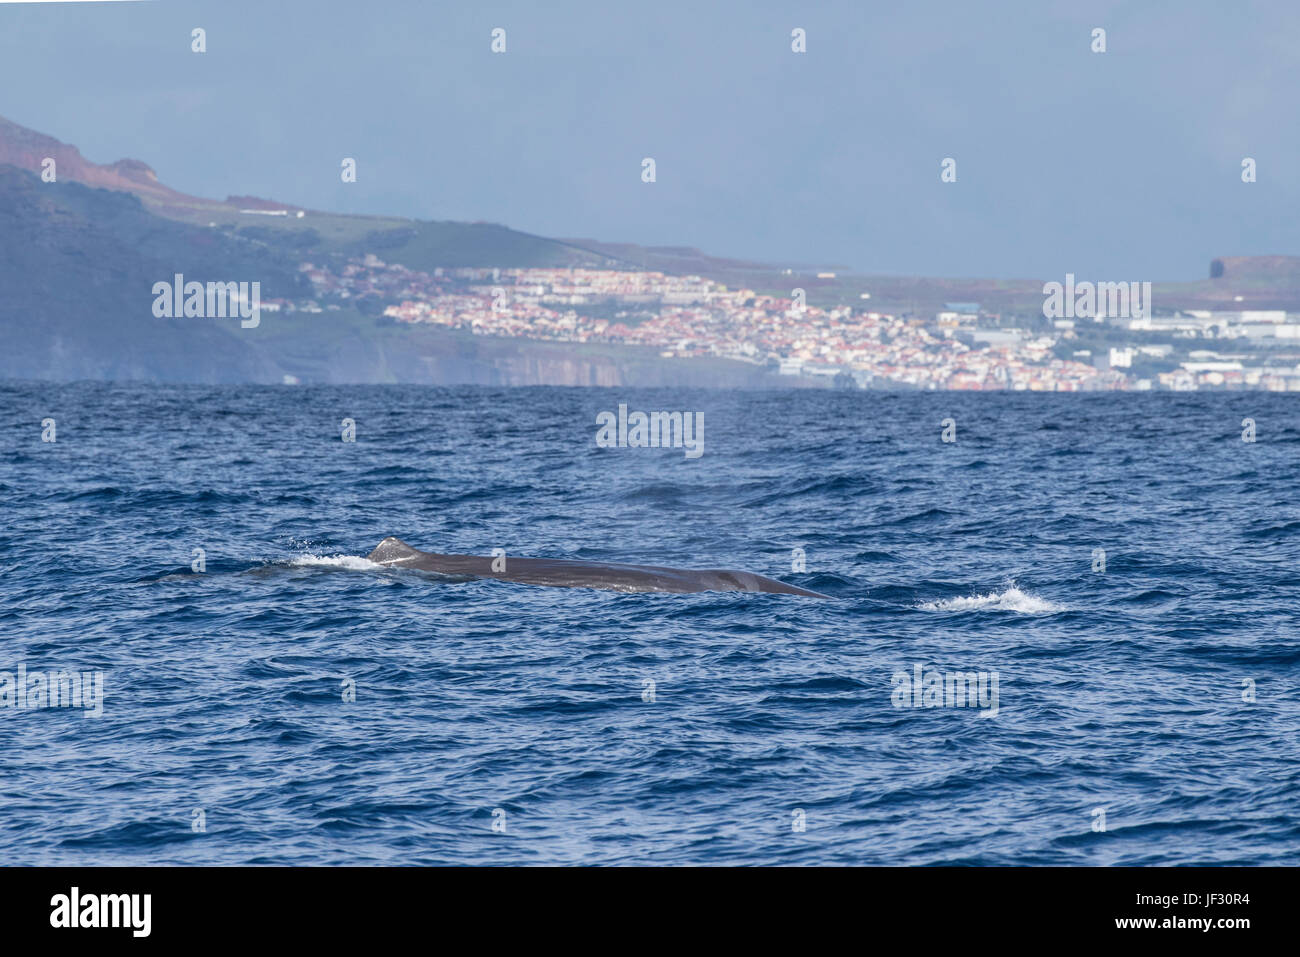 Female Sperm Whale, Physeter macrocephalus, or cachalot,surfacing with dorsal showing, in front of Funchal, Madeira, North Atlantic Ocean Stock Photo